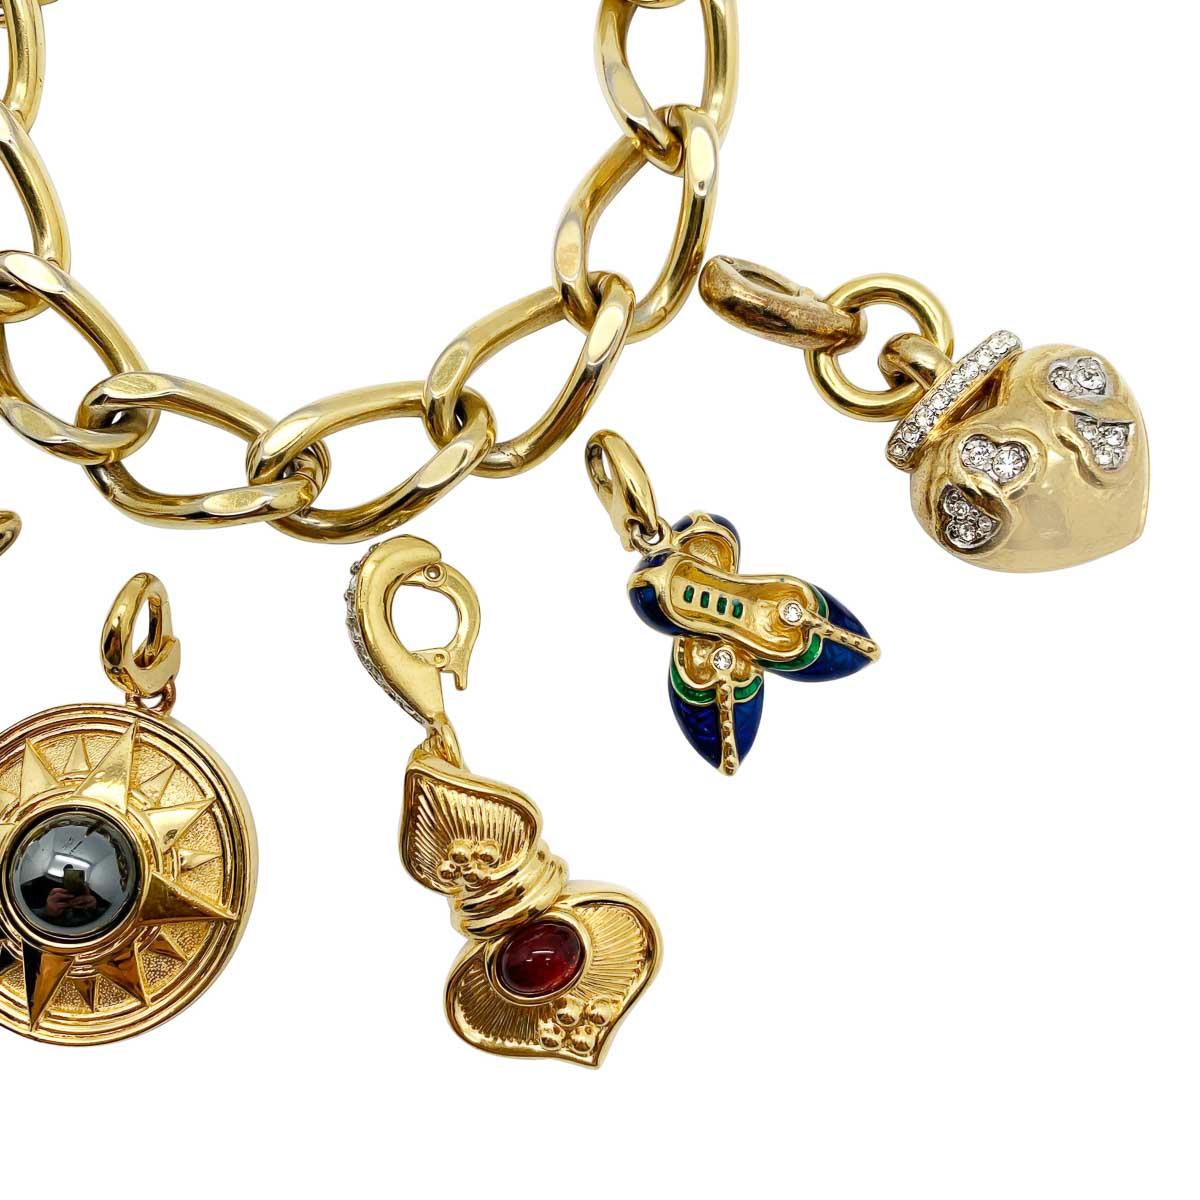 A wonderfully whimsical statement vintage detachable charm bracelet. Featuring an array of lustrous and symbolic charms along a flattened curb bracelet. The looks you can create feel endless. Each charm is beautiful in it's own way.

Vintage